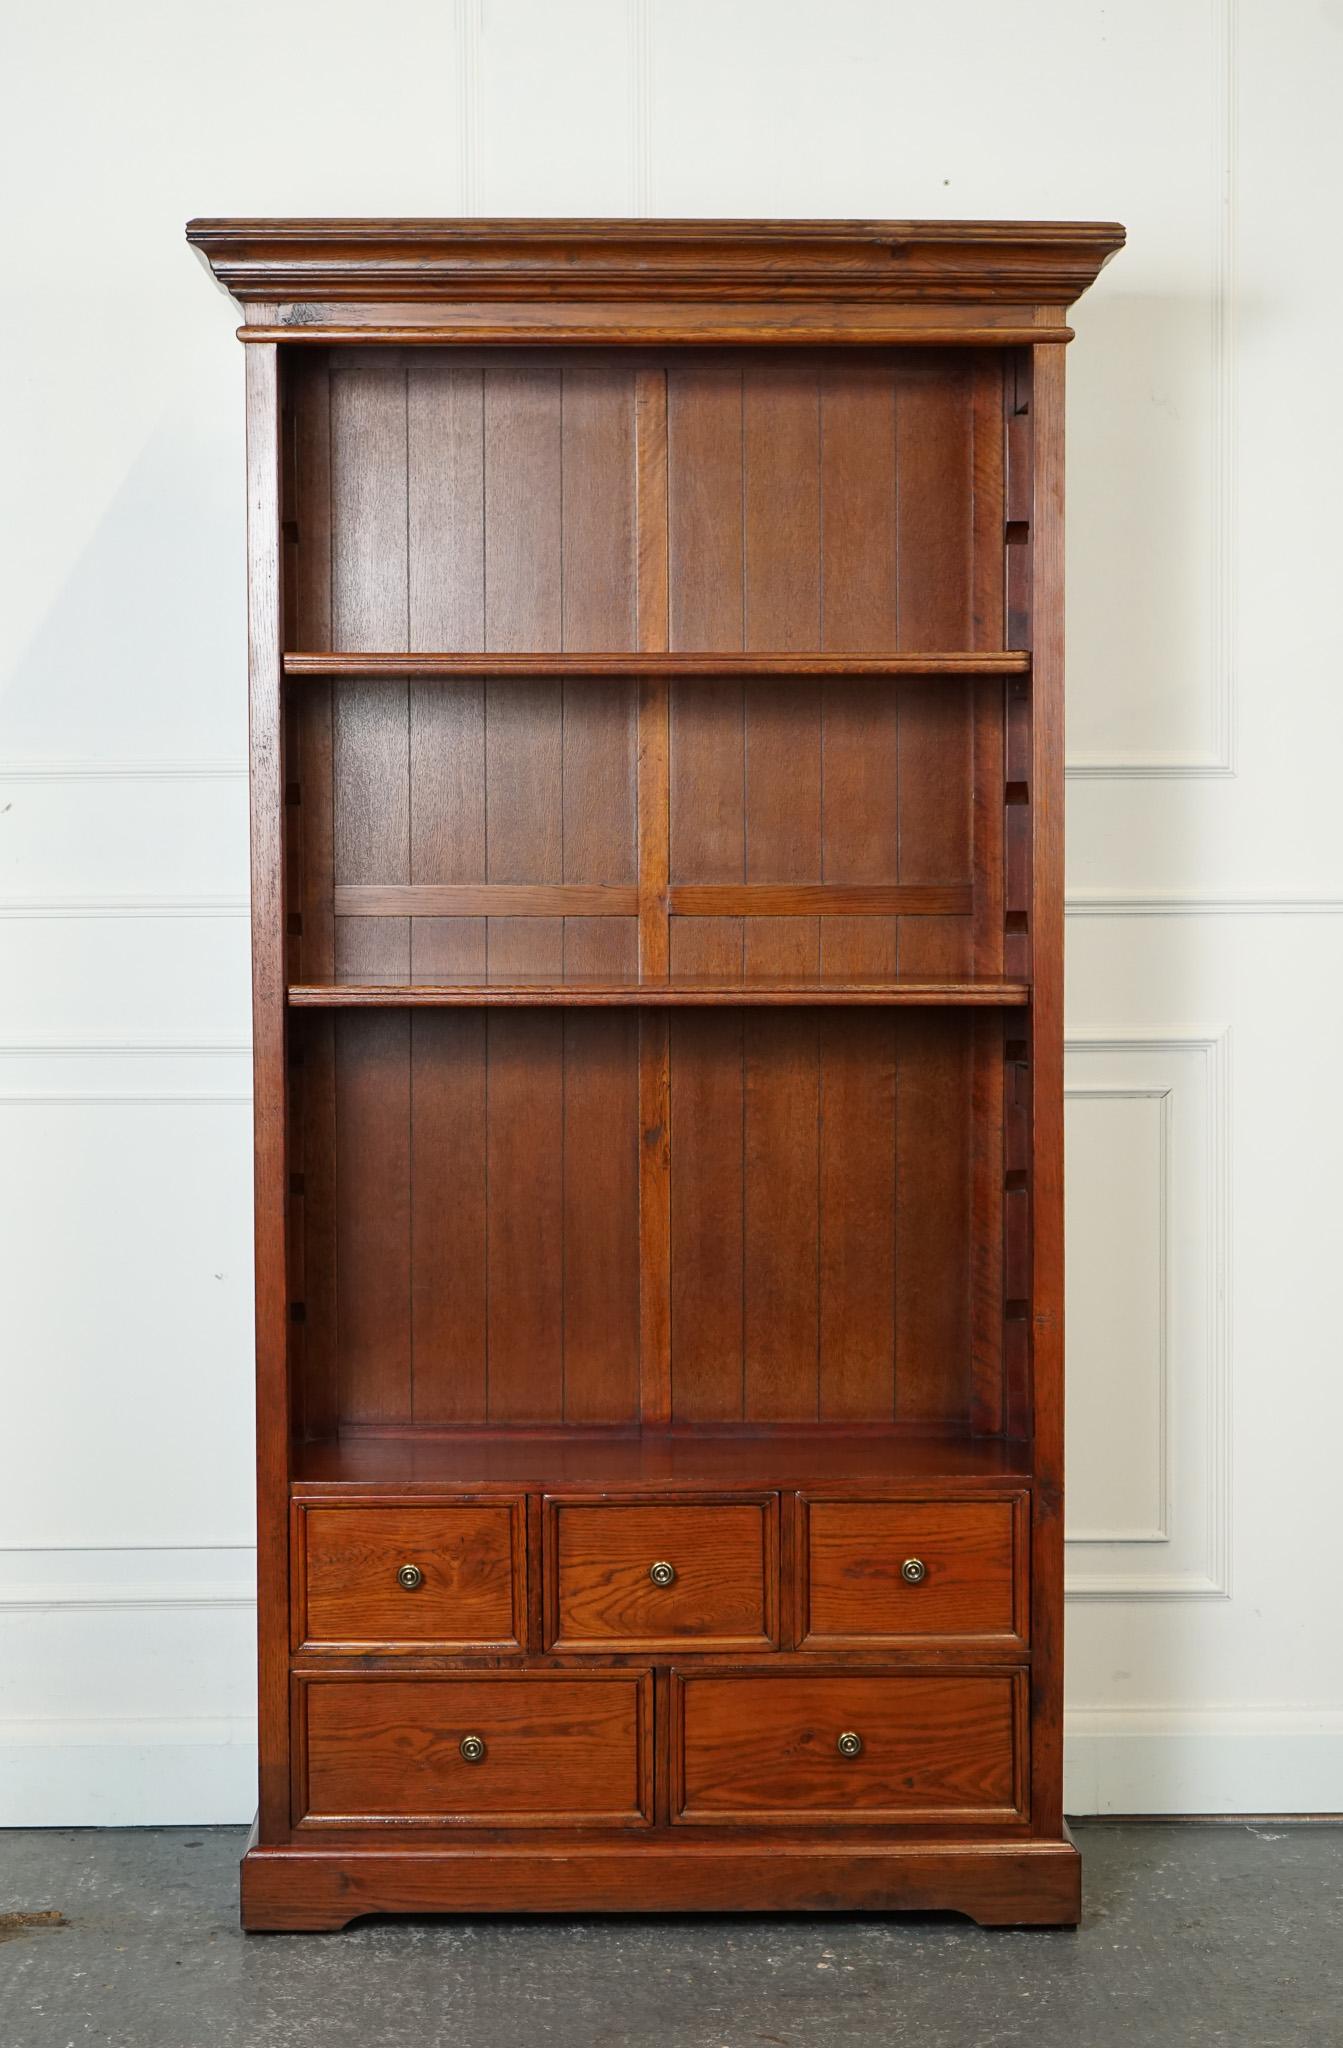 British LOVELY VINTAGE TEAK OPEN BOOKCASE WITH 5 DRAWERS BRASS HANDLES j1 For Sale